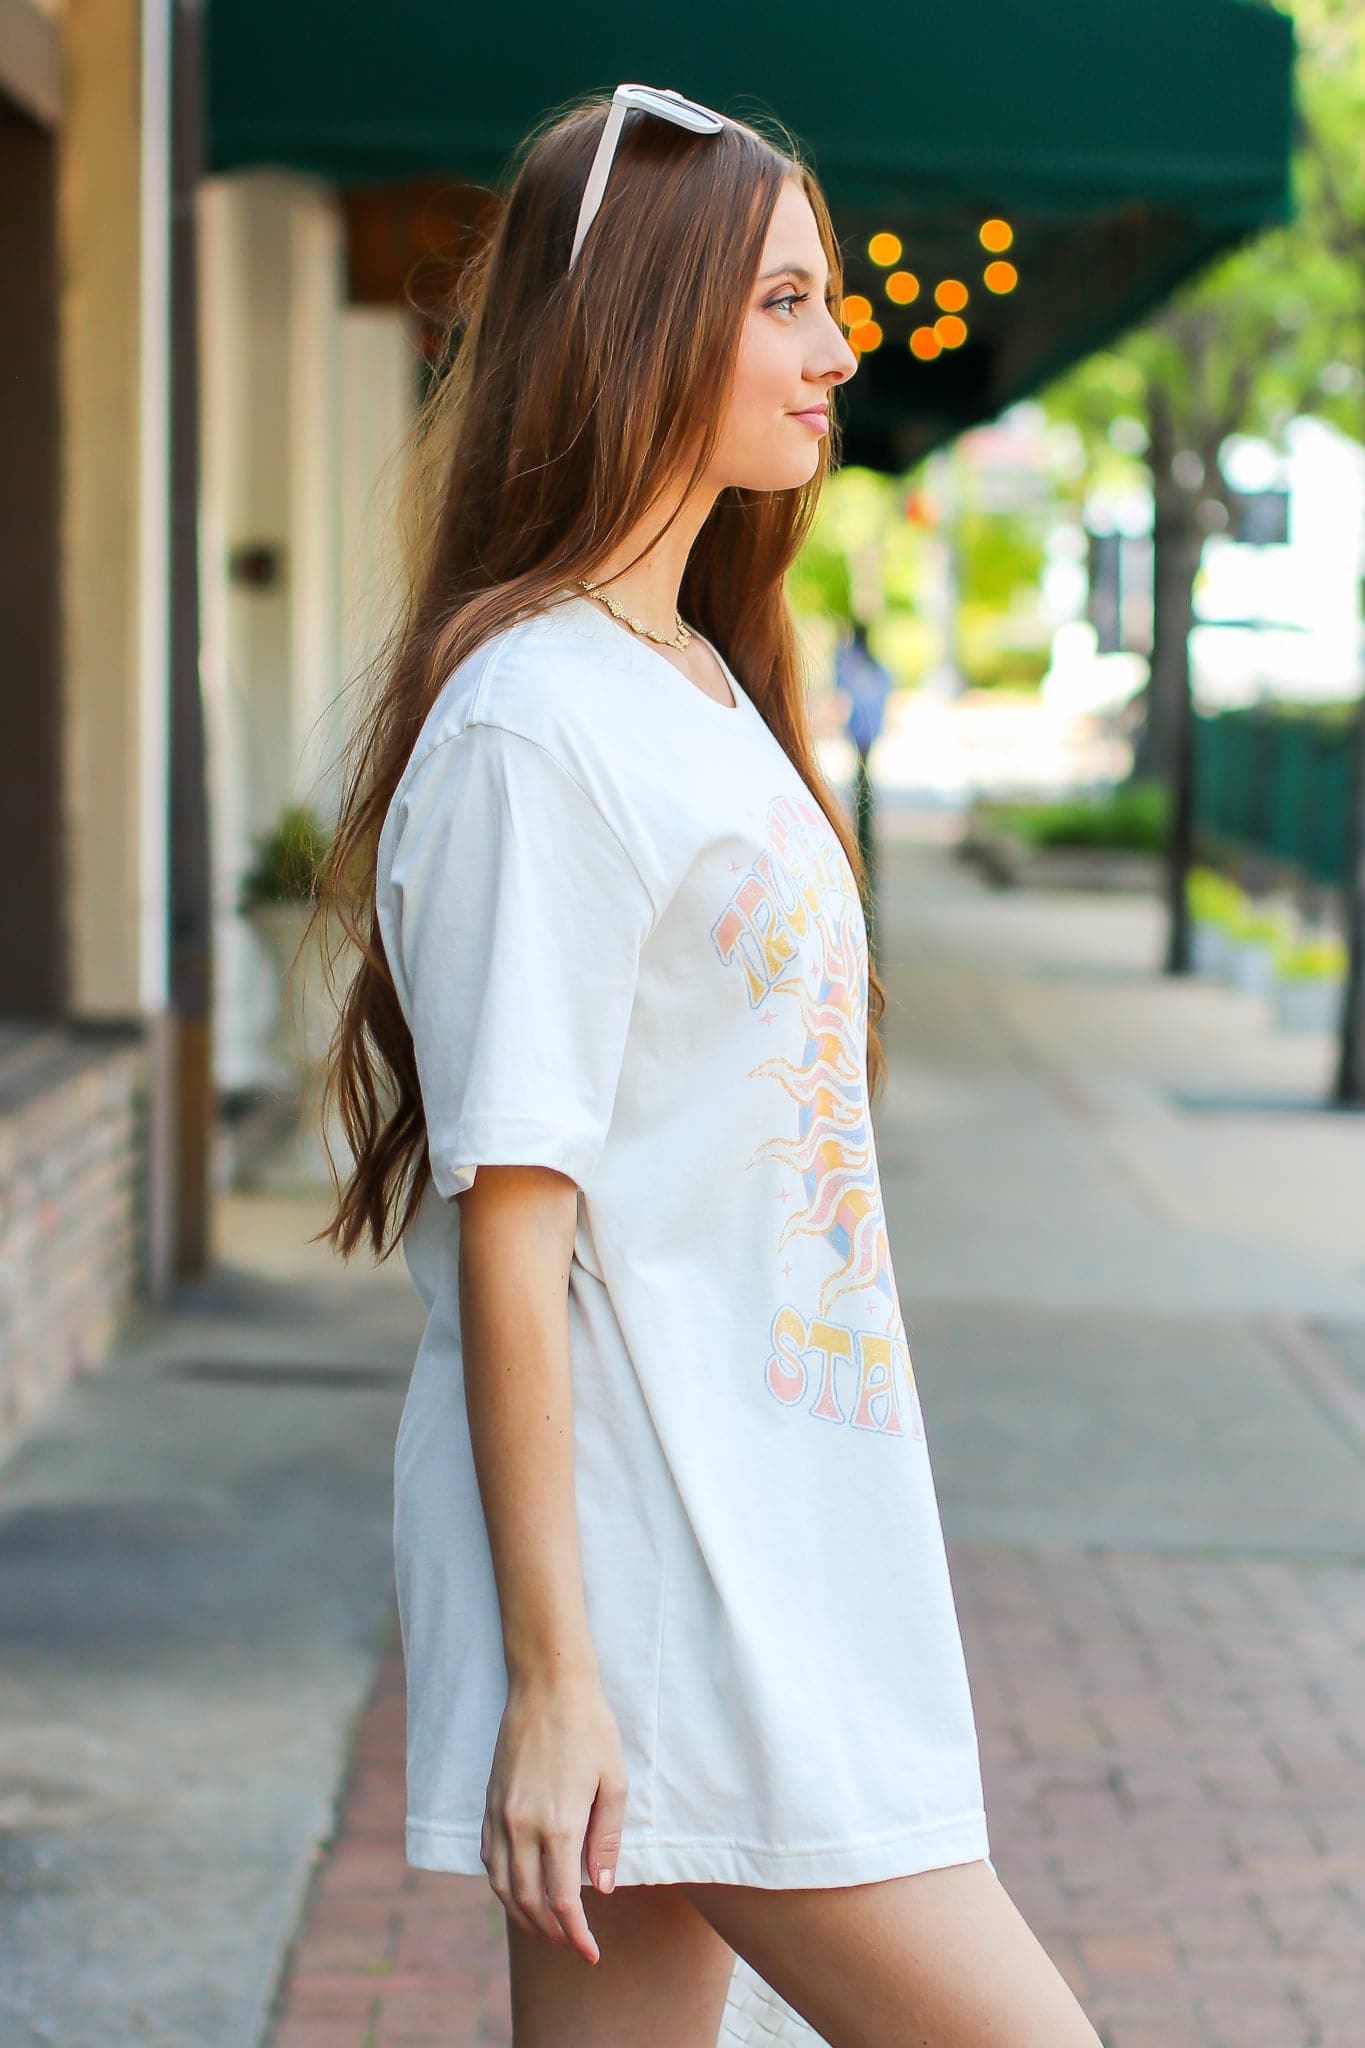  Trust the Process Yin Yang Vintage Graphic Tee - FINAL SALE - Madison and Mallory